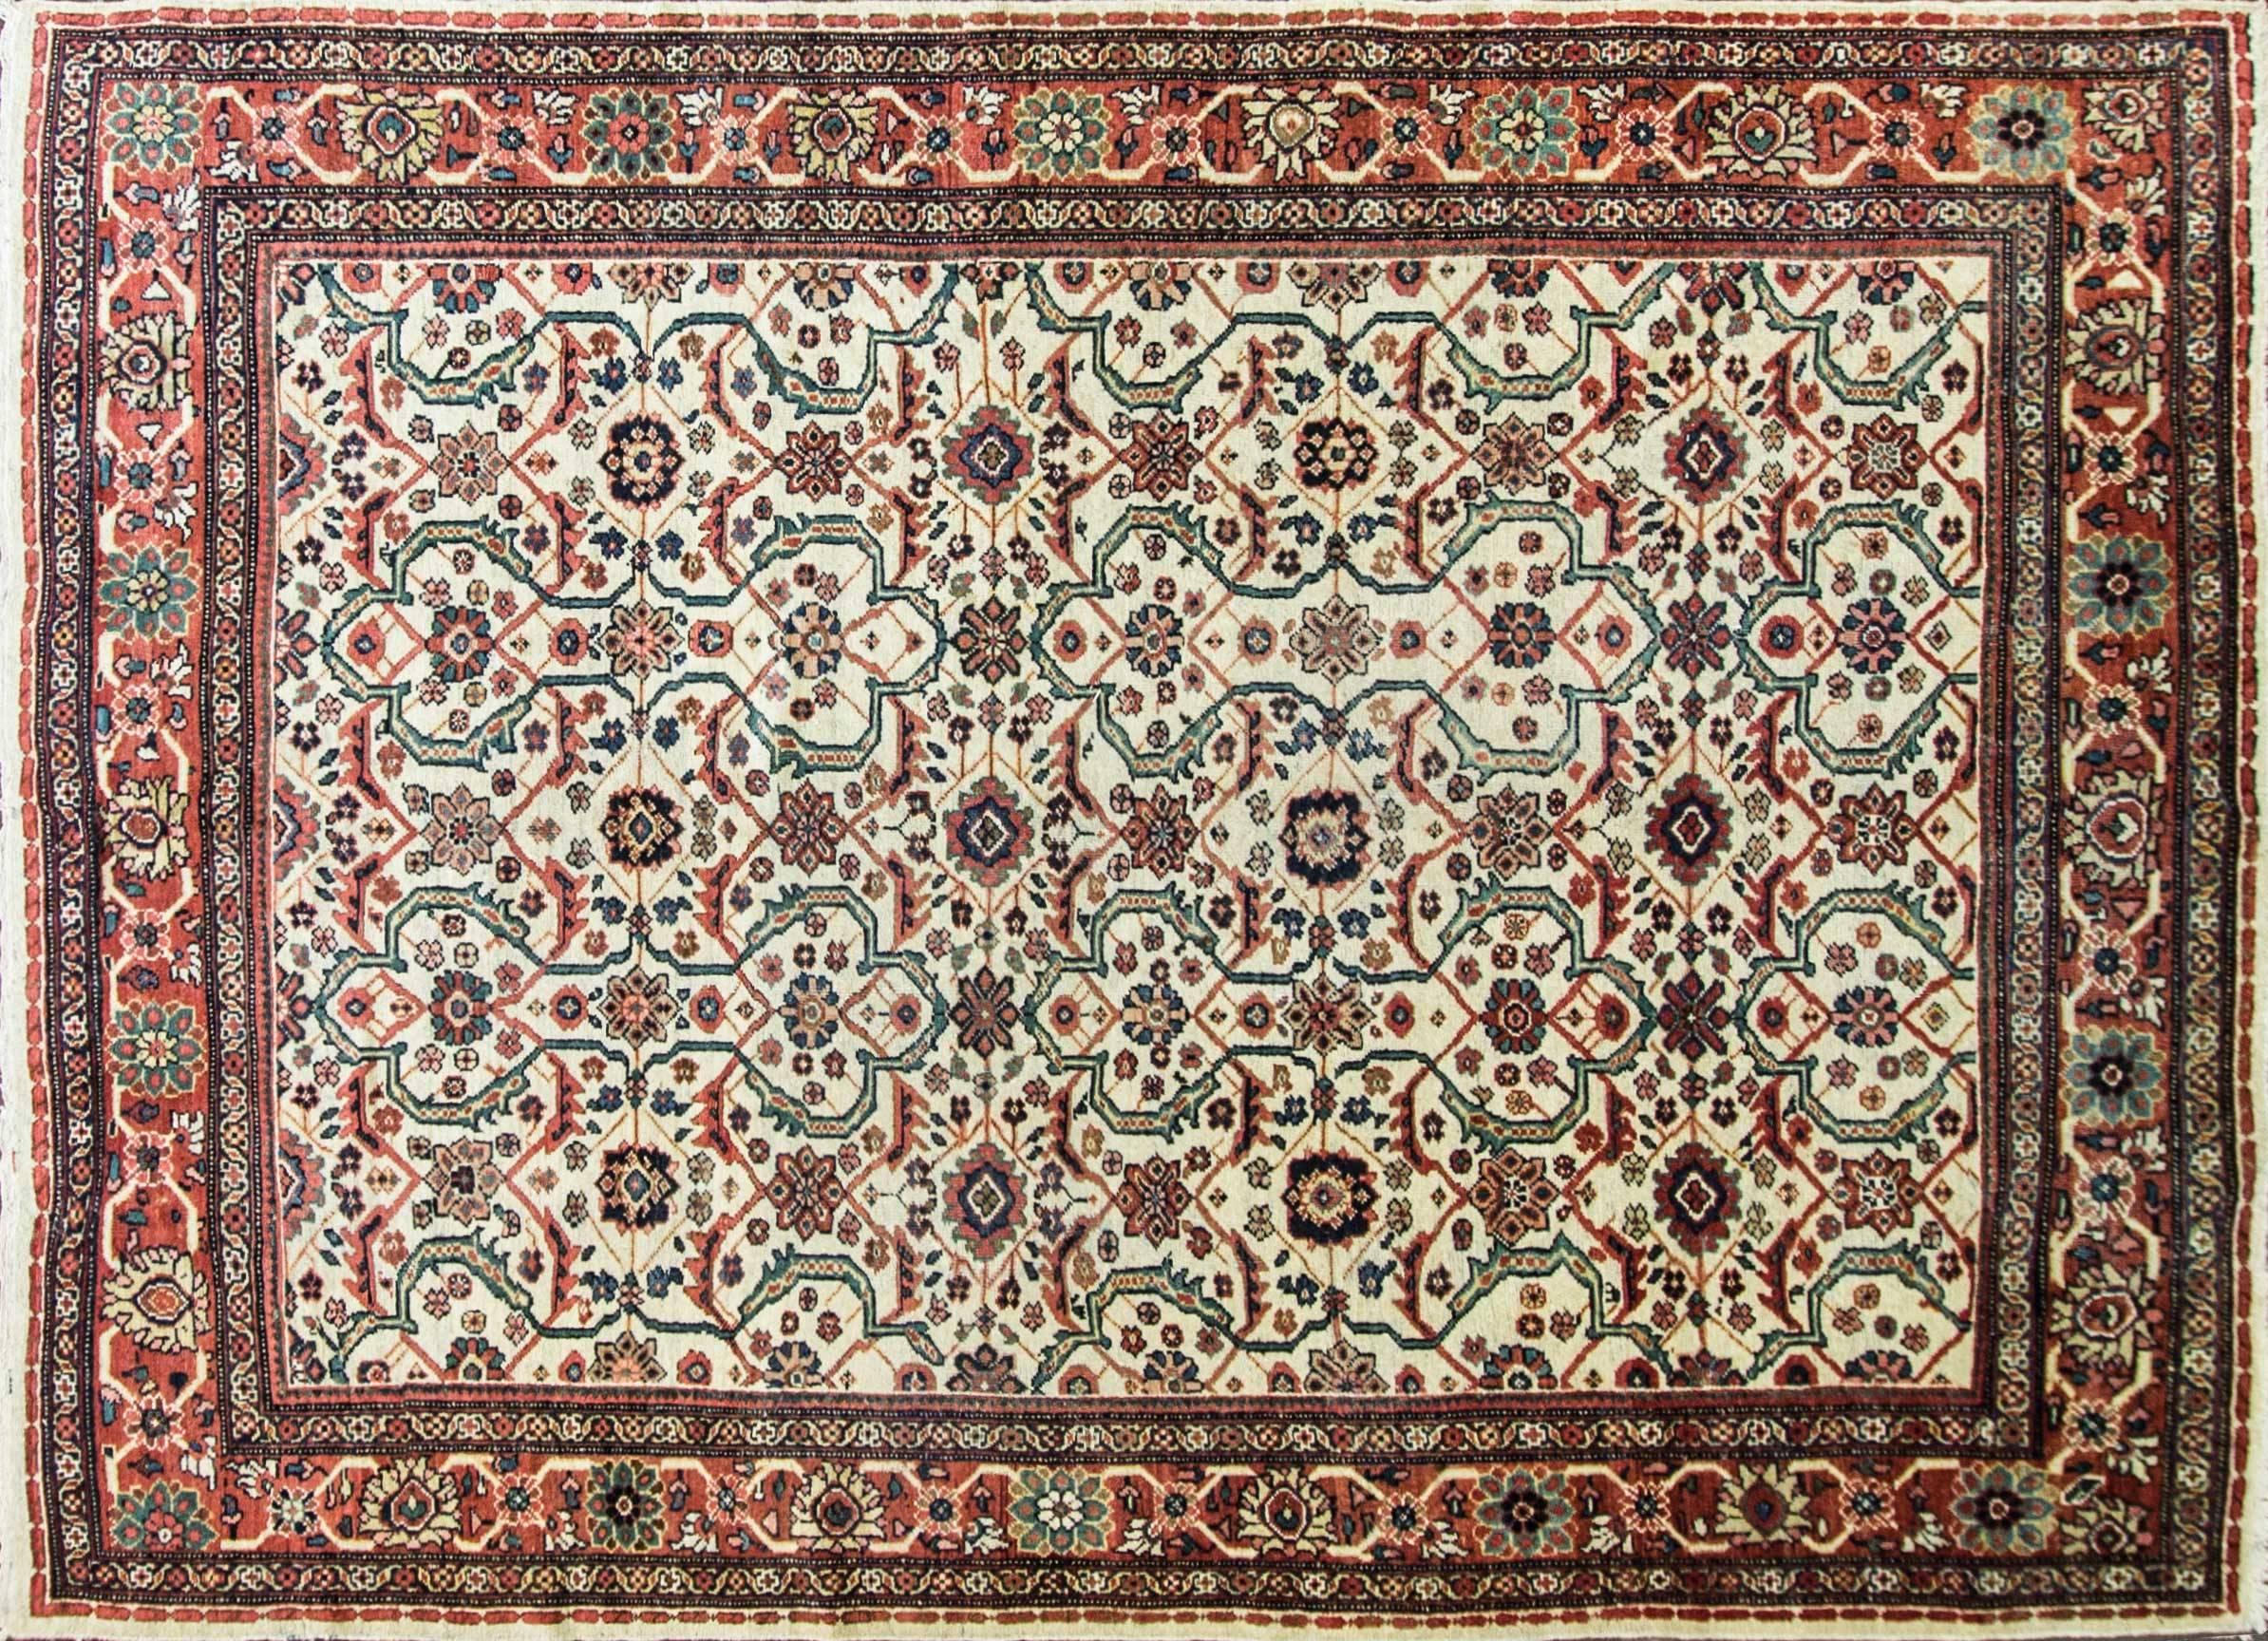 
Stunning Persian carpet with Ivory background color combined with wonderful green red and brown with exciting all-over design of flowers and geometric pattern.
Woven with very fine vegetable dyed wool. A good quality and excellent condition need